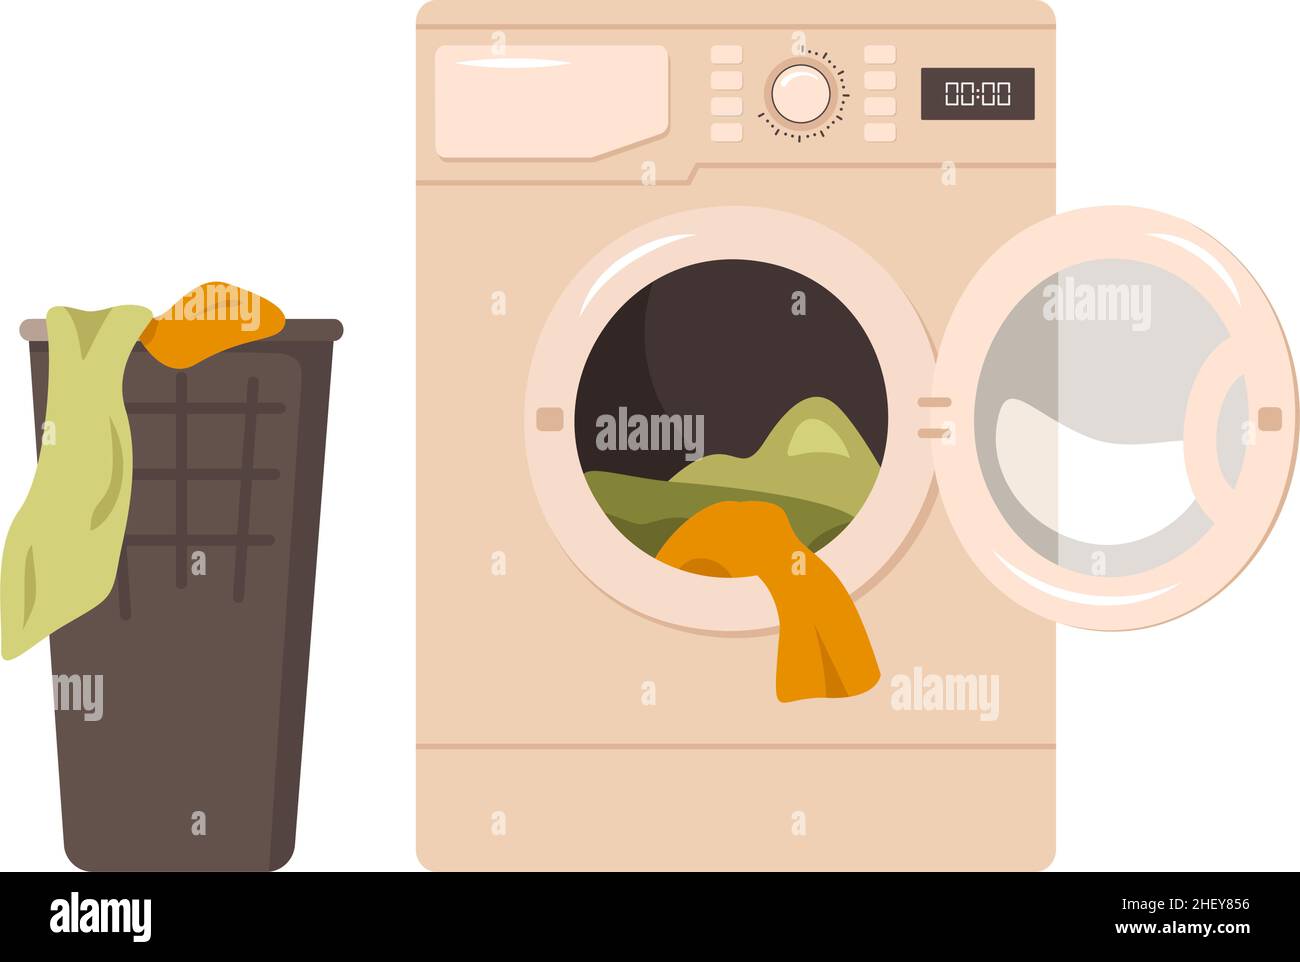 Washing machine icon and basket for dirty clothes. Front view of appliances in the bathroom. Vector flat illustration Stock Vector